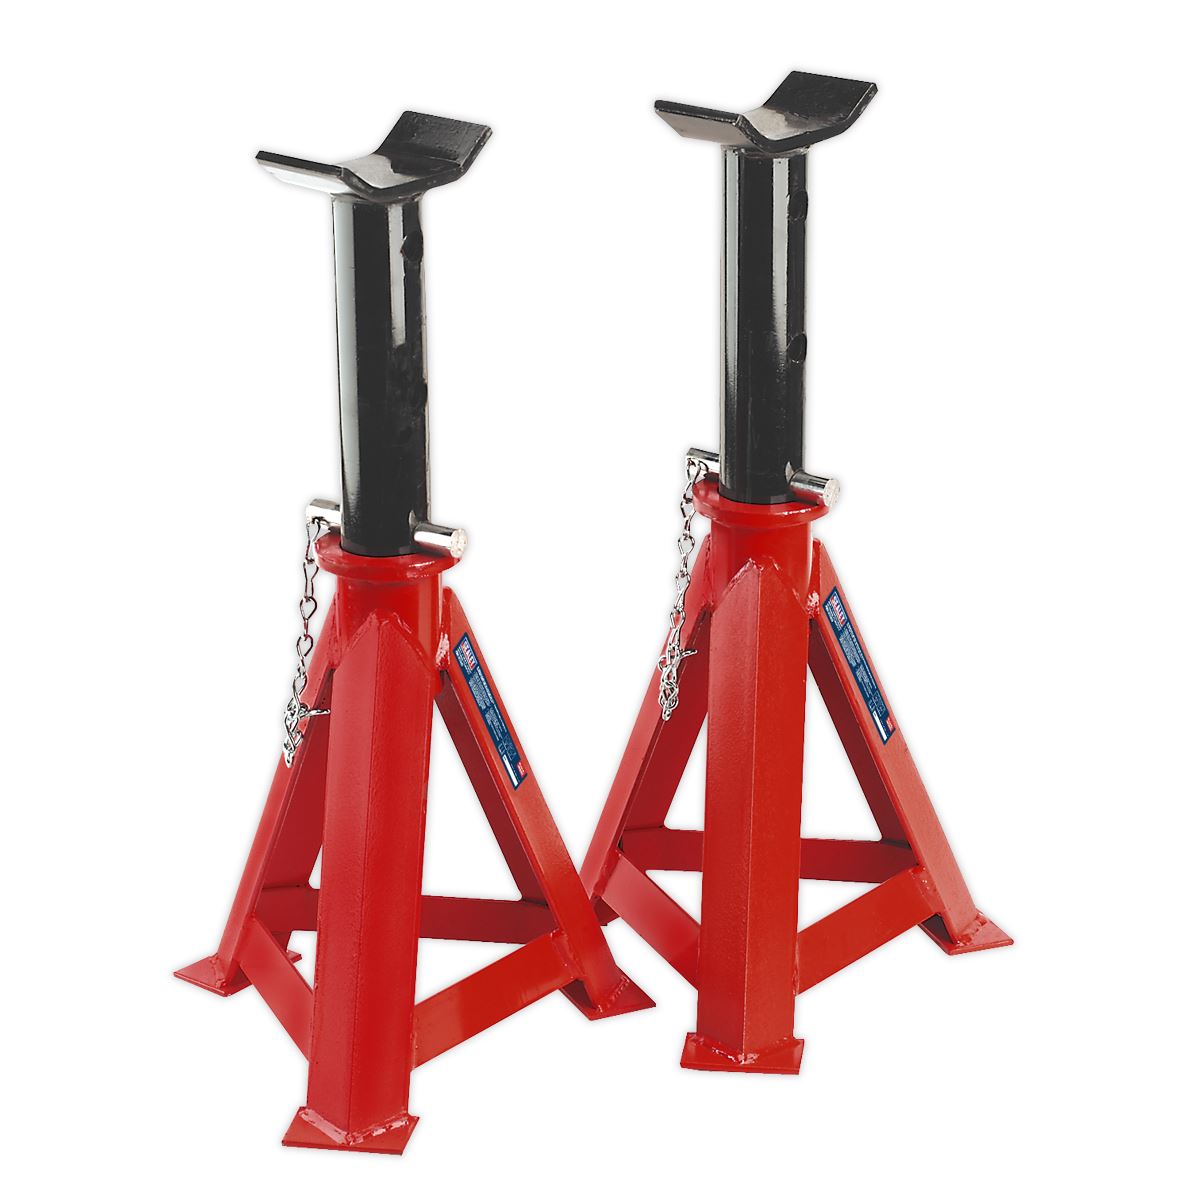 Sealey Axle Stands (Pair) 12 Tonne Capacity per Stand